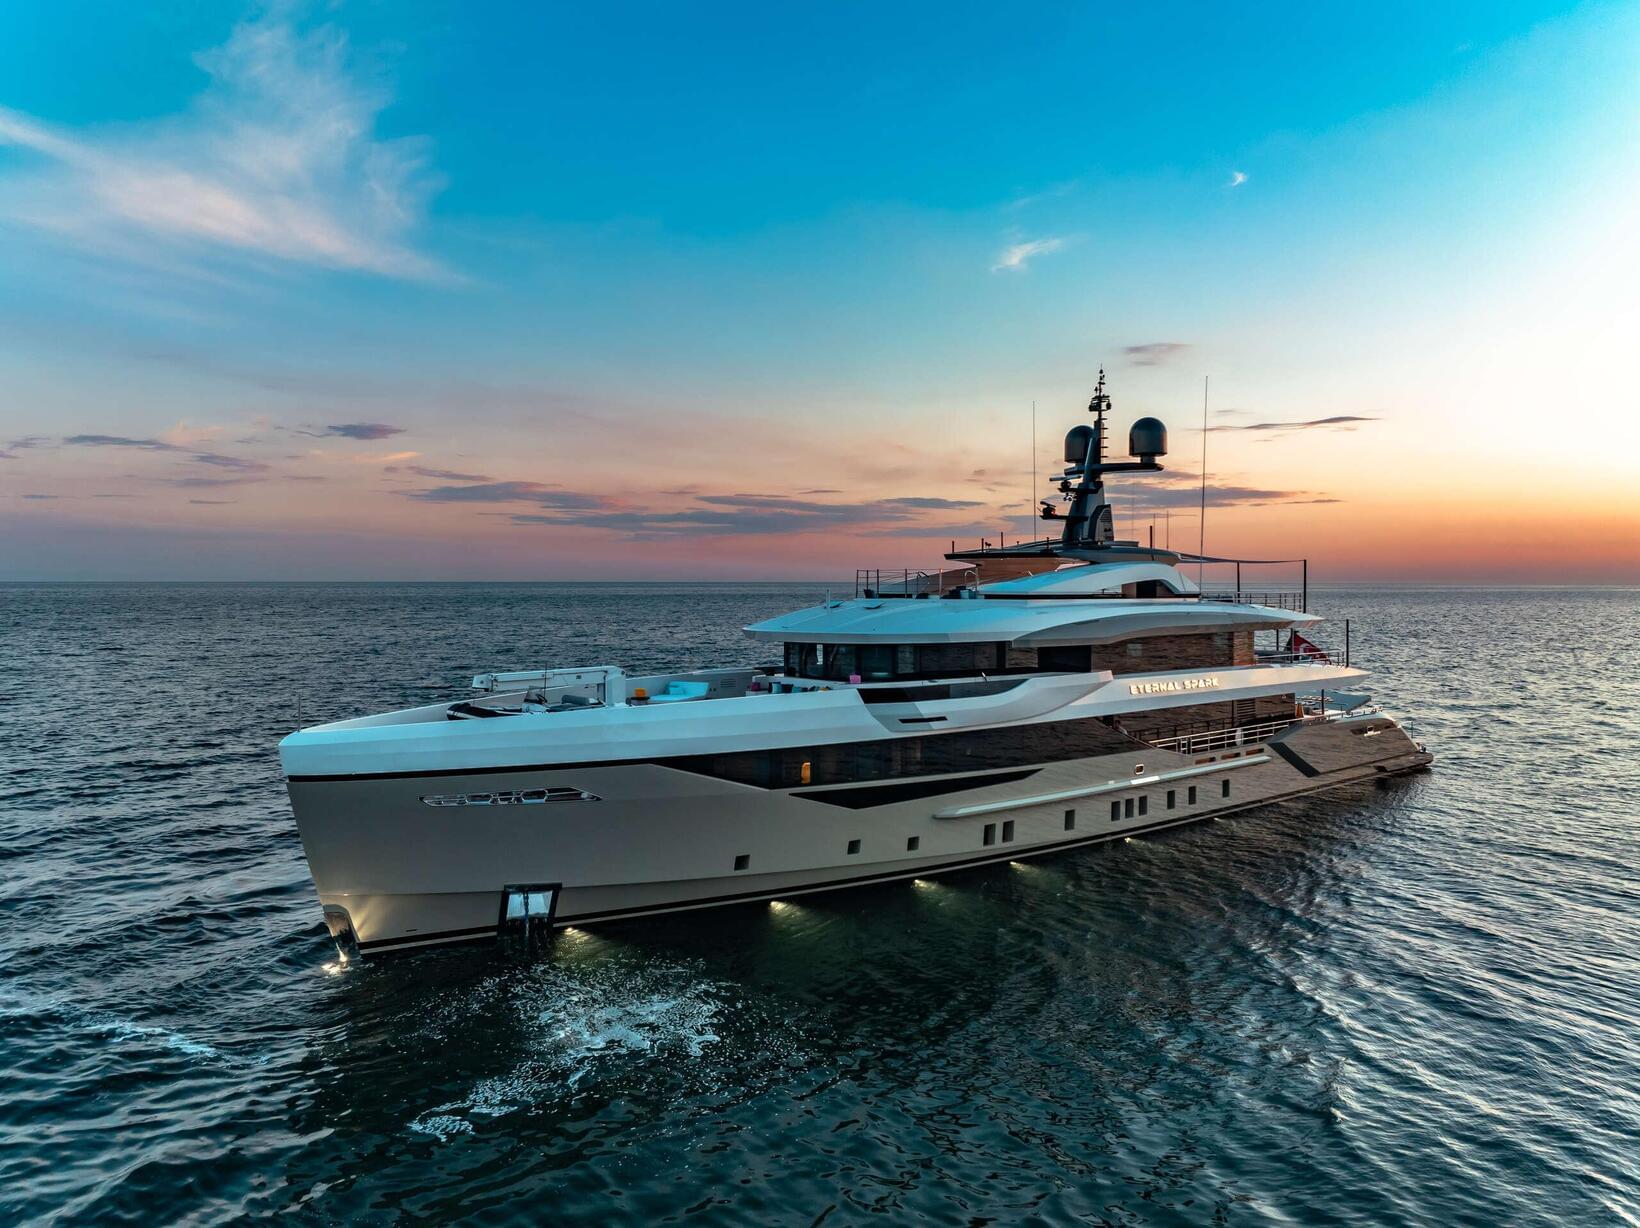 ETERNAL SPARK: THE ULTIMATE YACHT FOR CHARTER EXPERIENCES